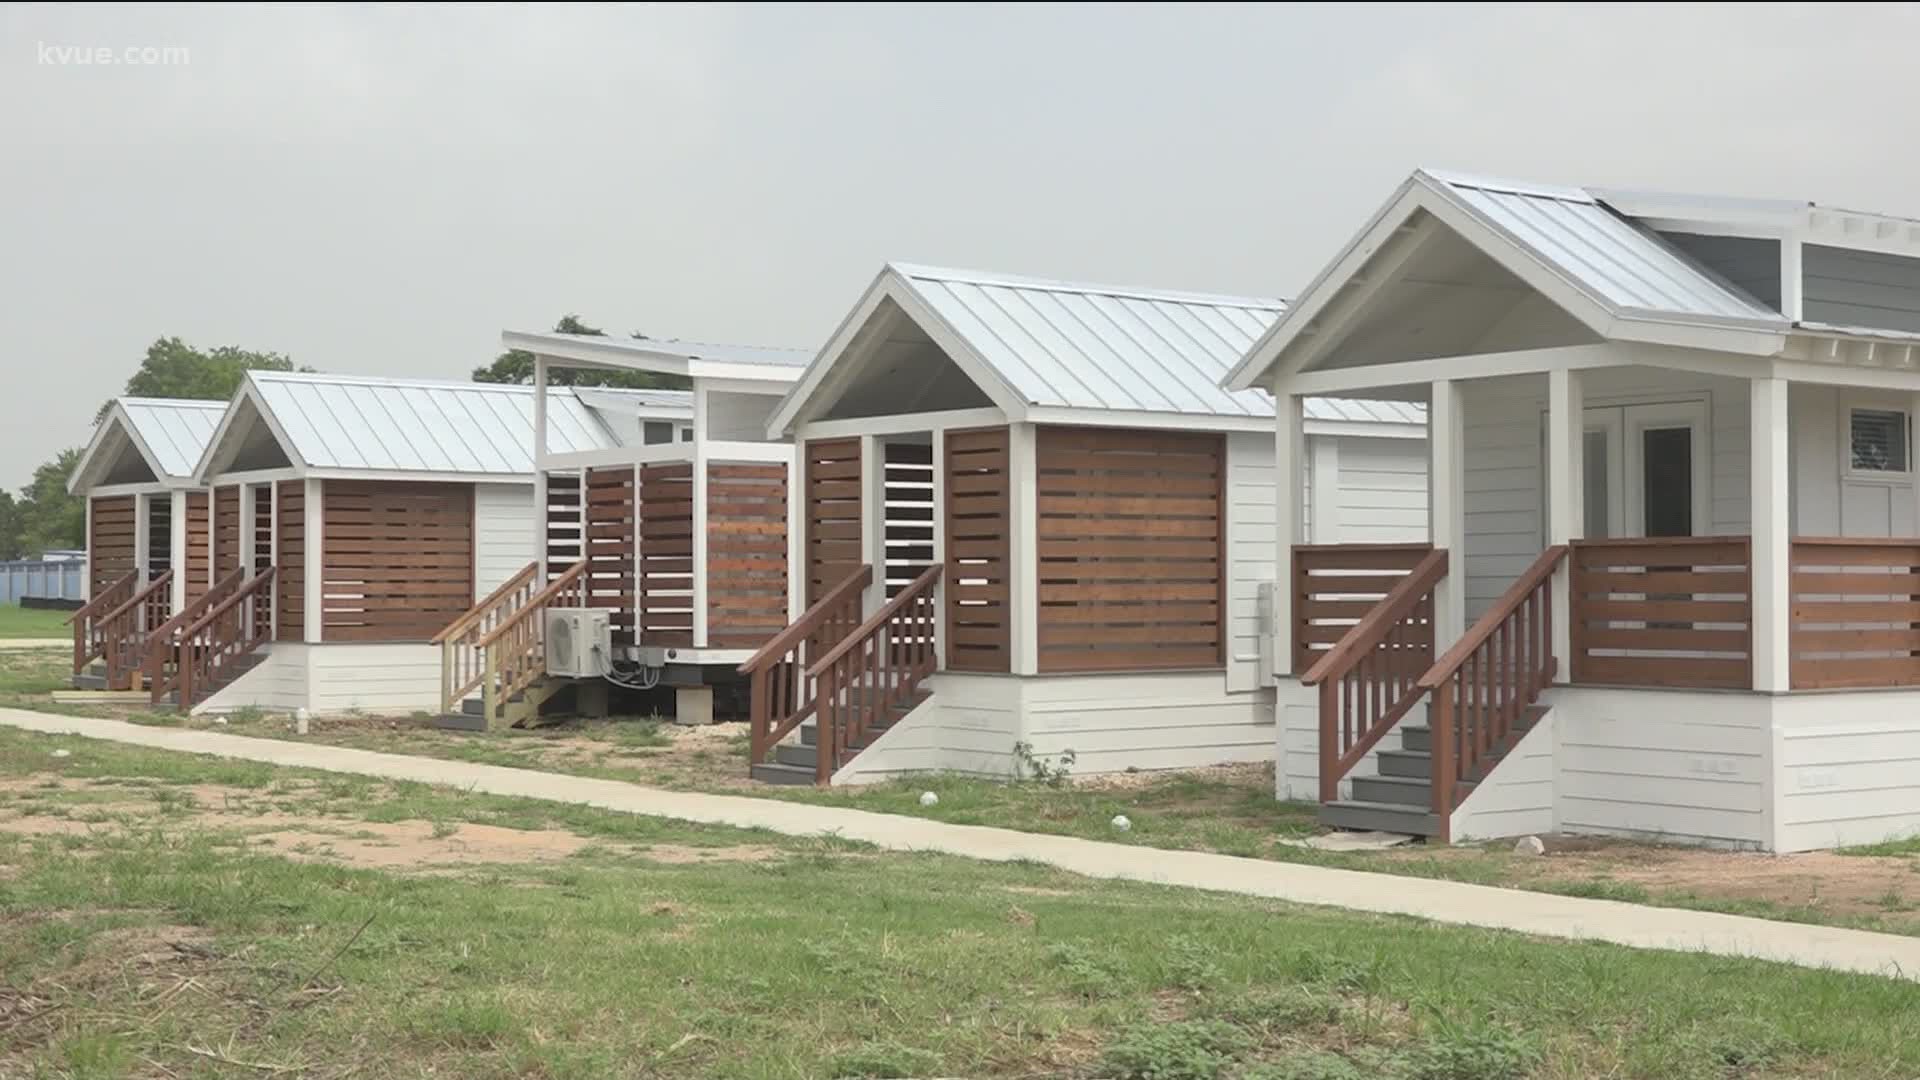 Roberts Communities built tiny homes in the neighborhood east of Downtown Austin in 2018.